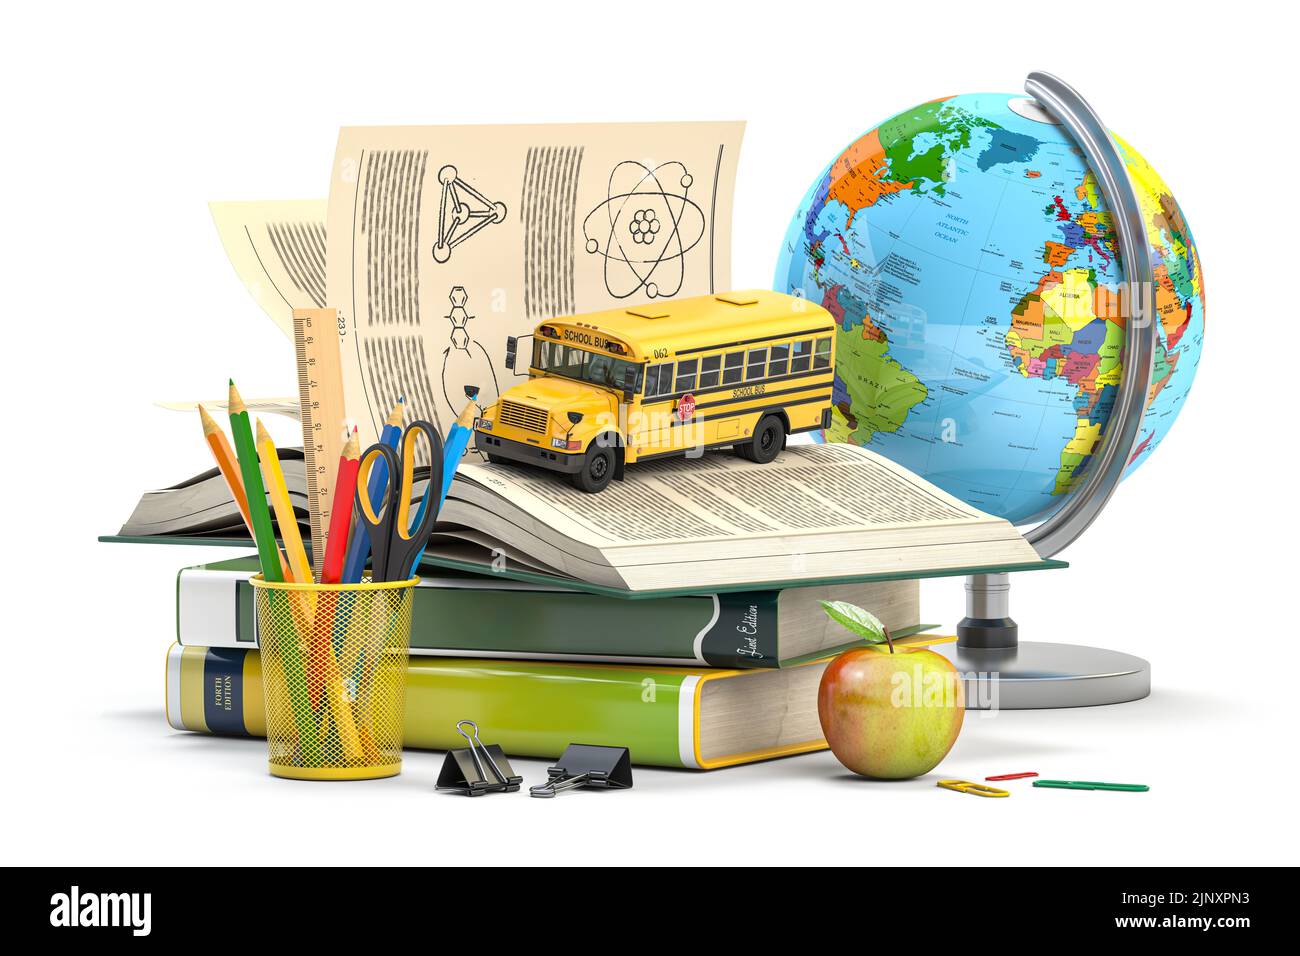 Back to school, education and learning concept. School  accessories, books and textbooks, school bus, pencils and globe isolated on white. 3d illustra Stock Photo